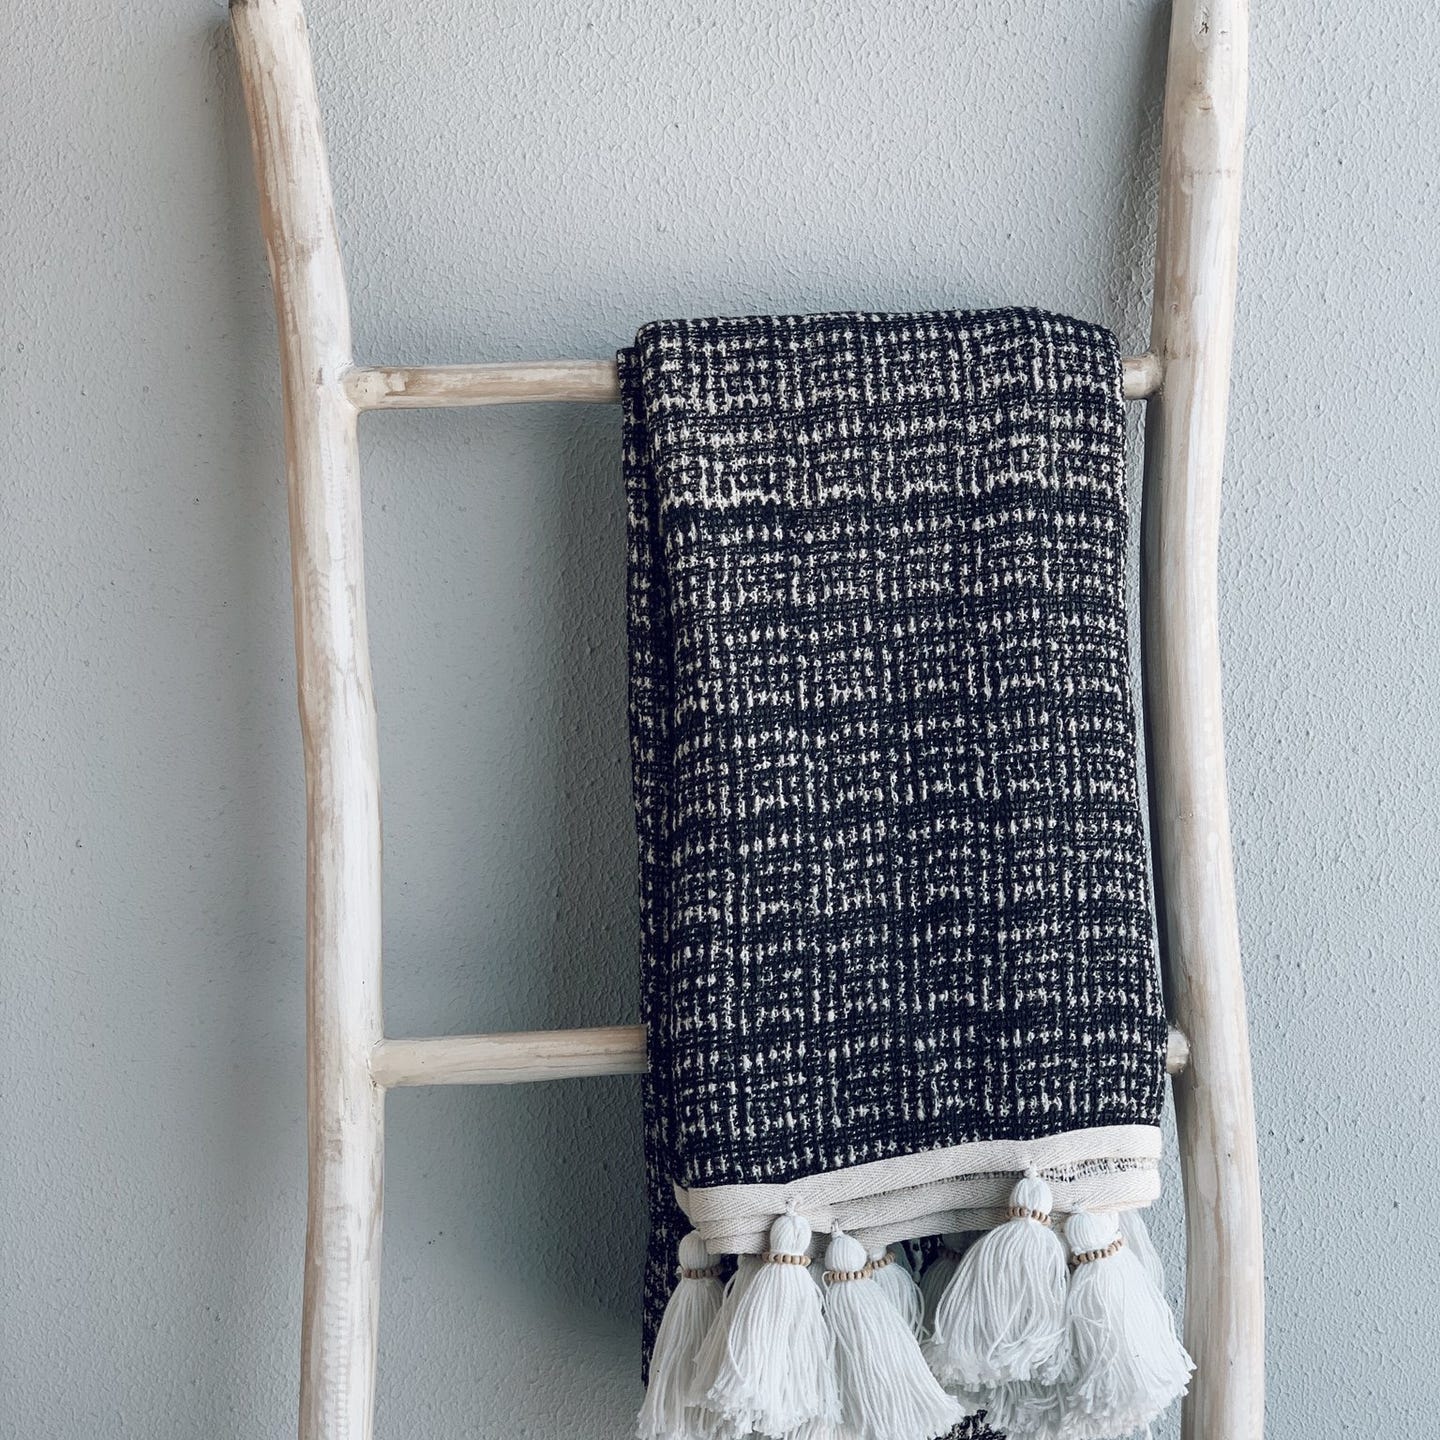 Hand-sewn blanket with tassels